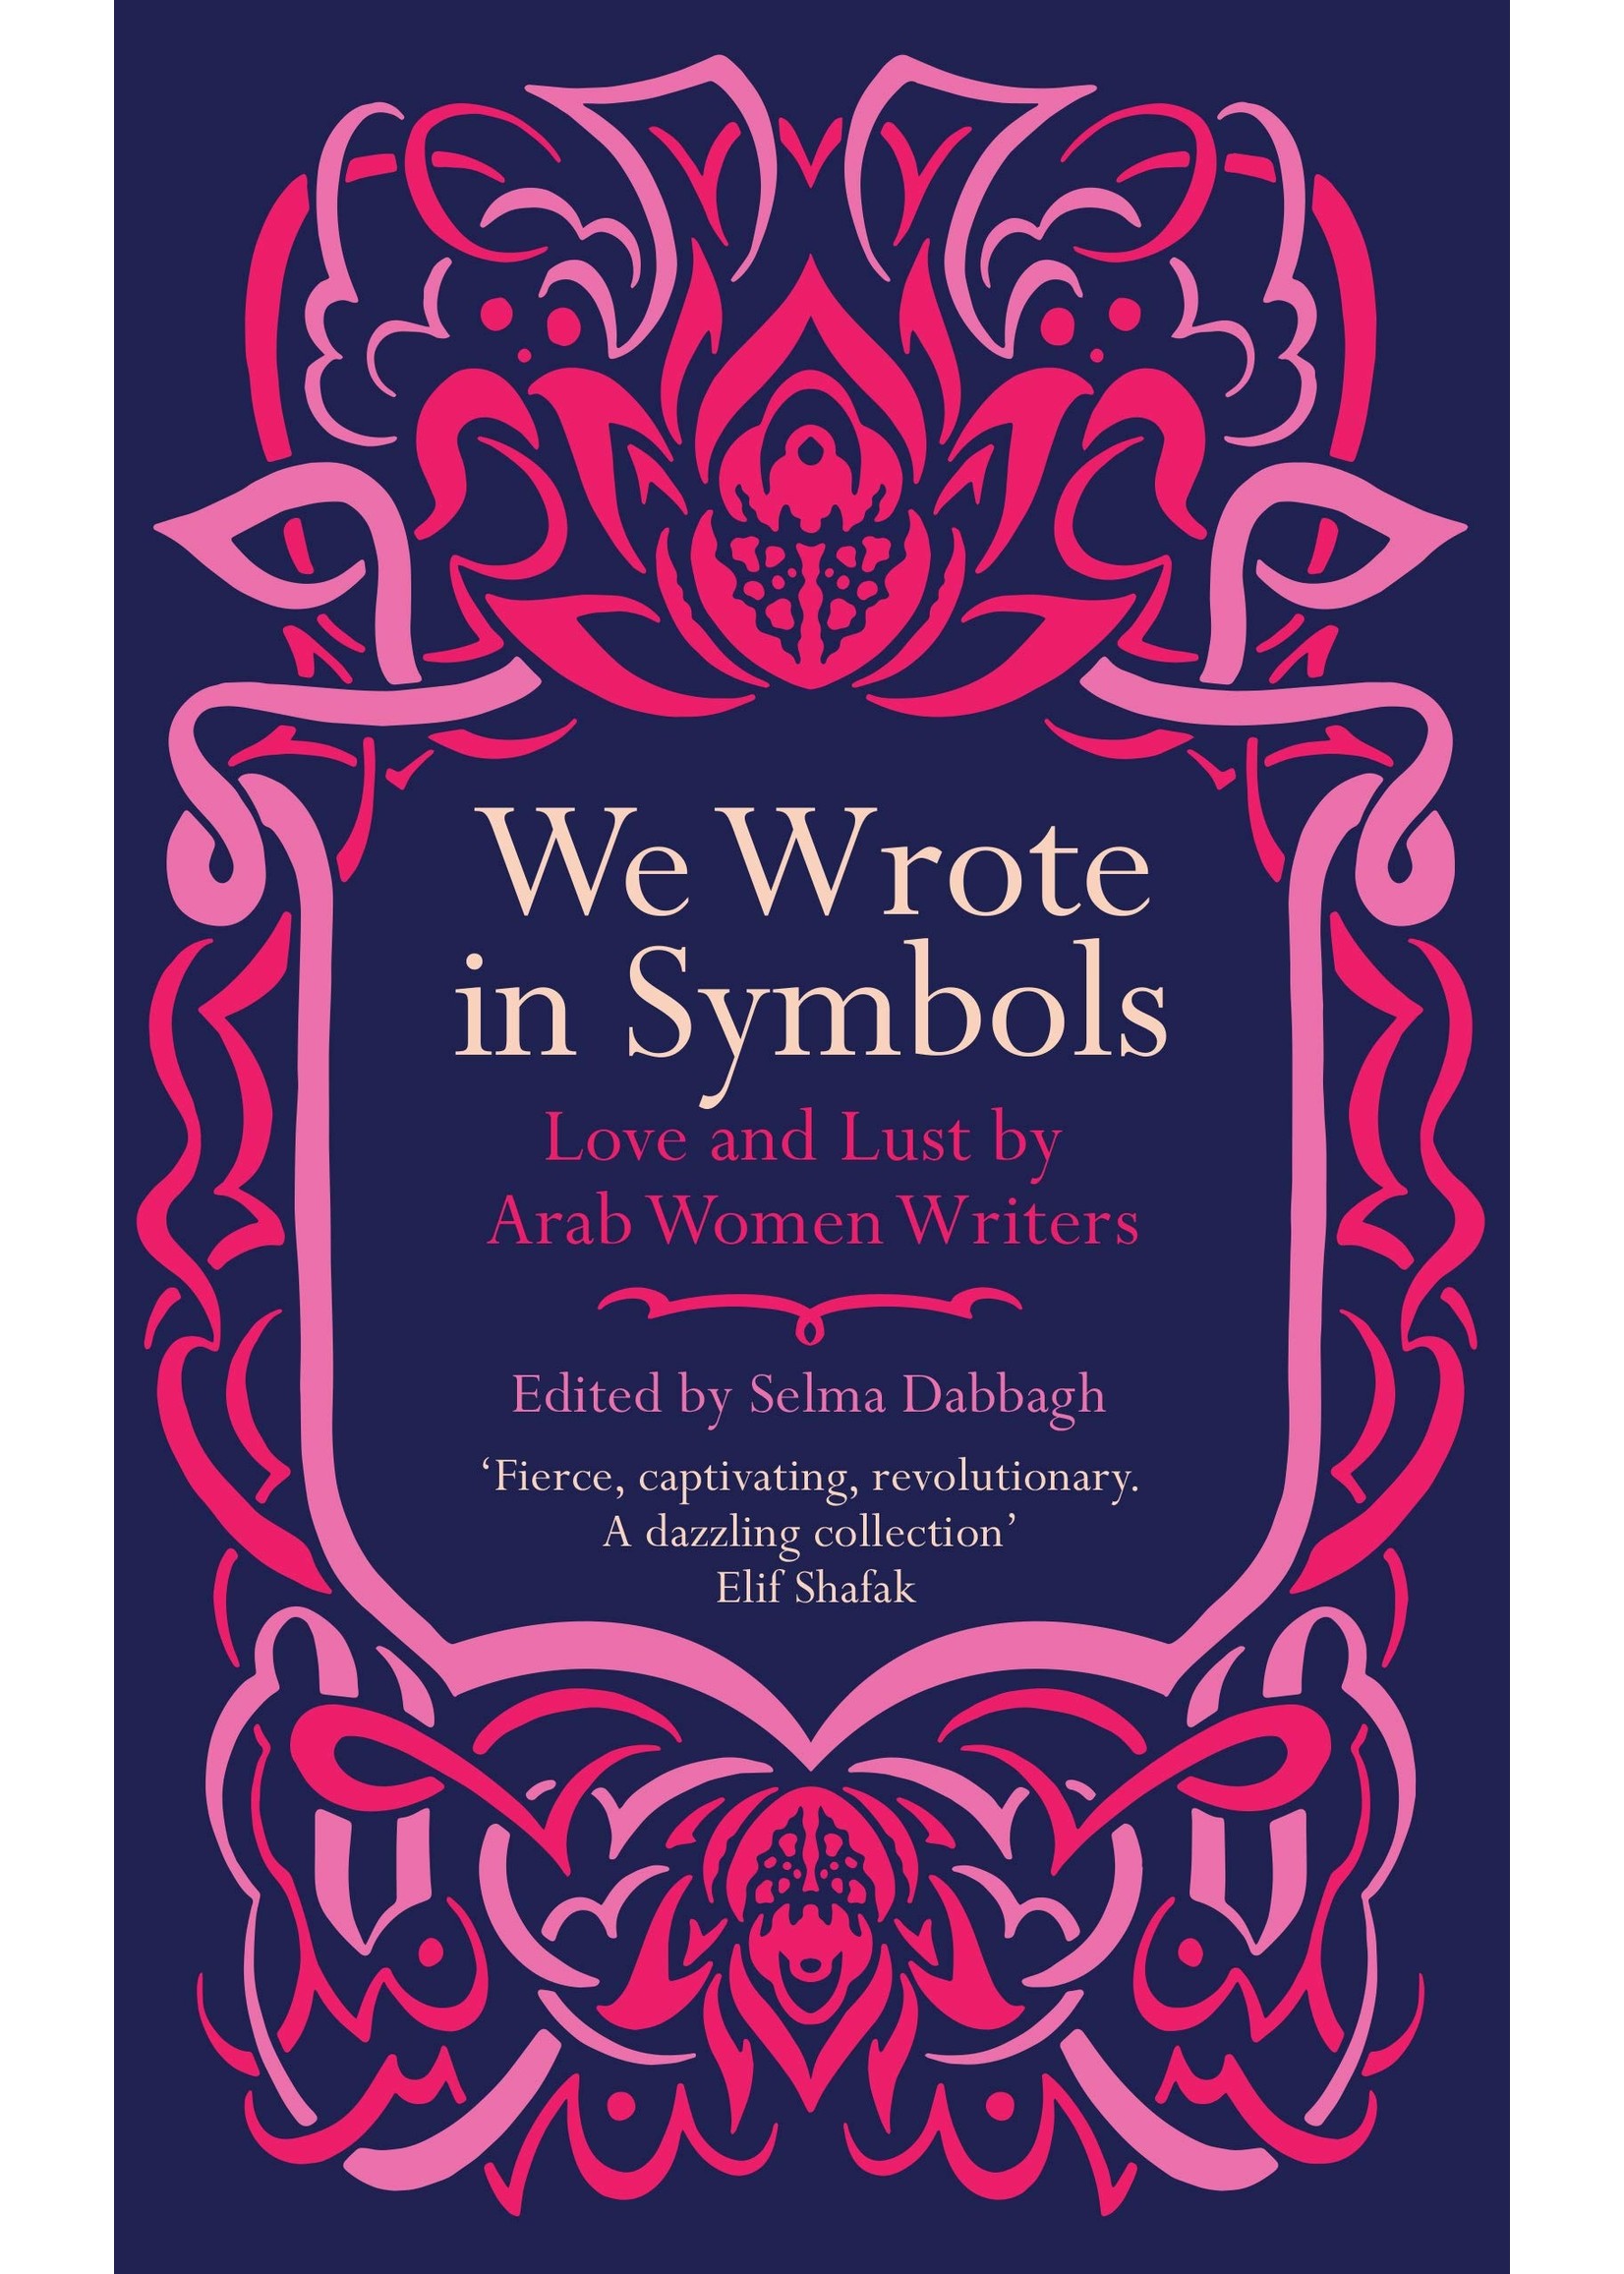 We Wrote in Symbols: Love and Lust By Arab Women Writers